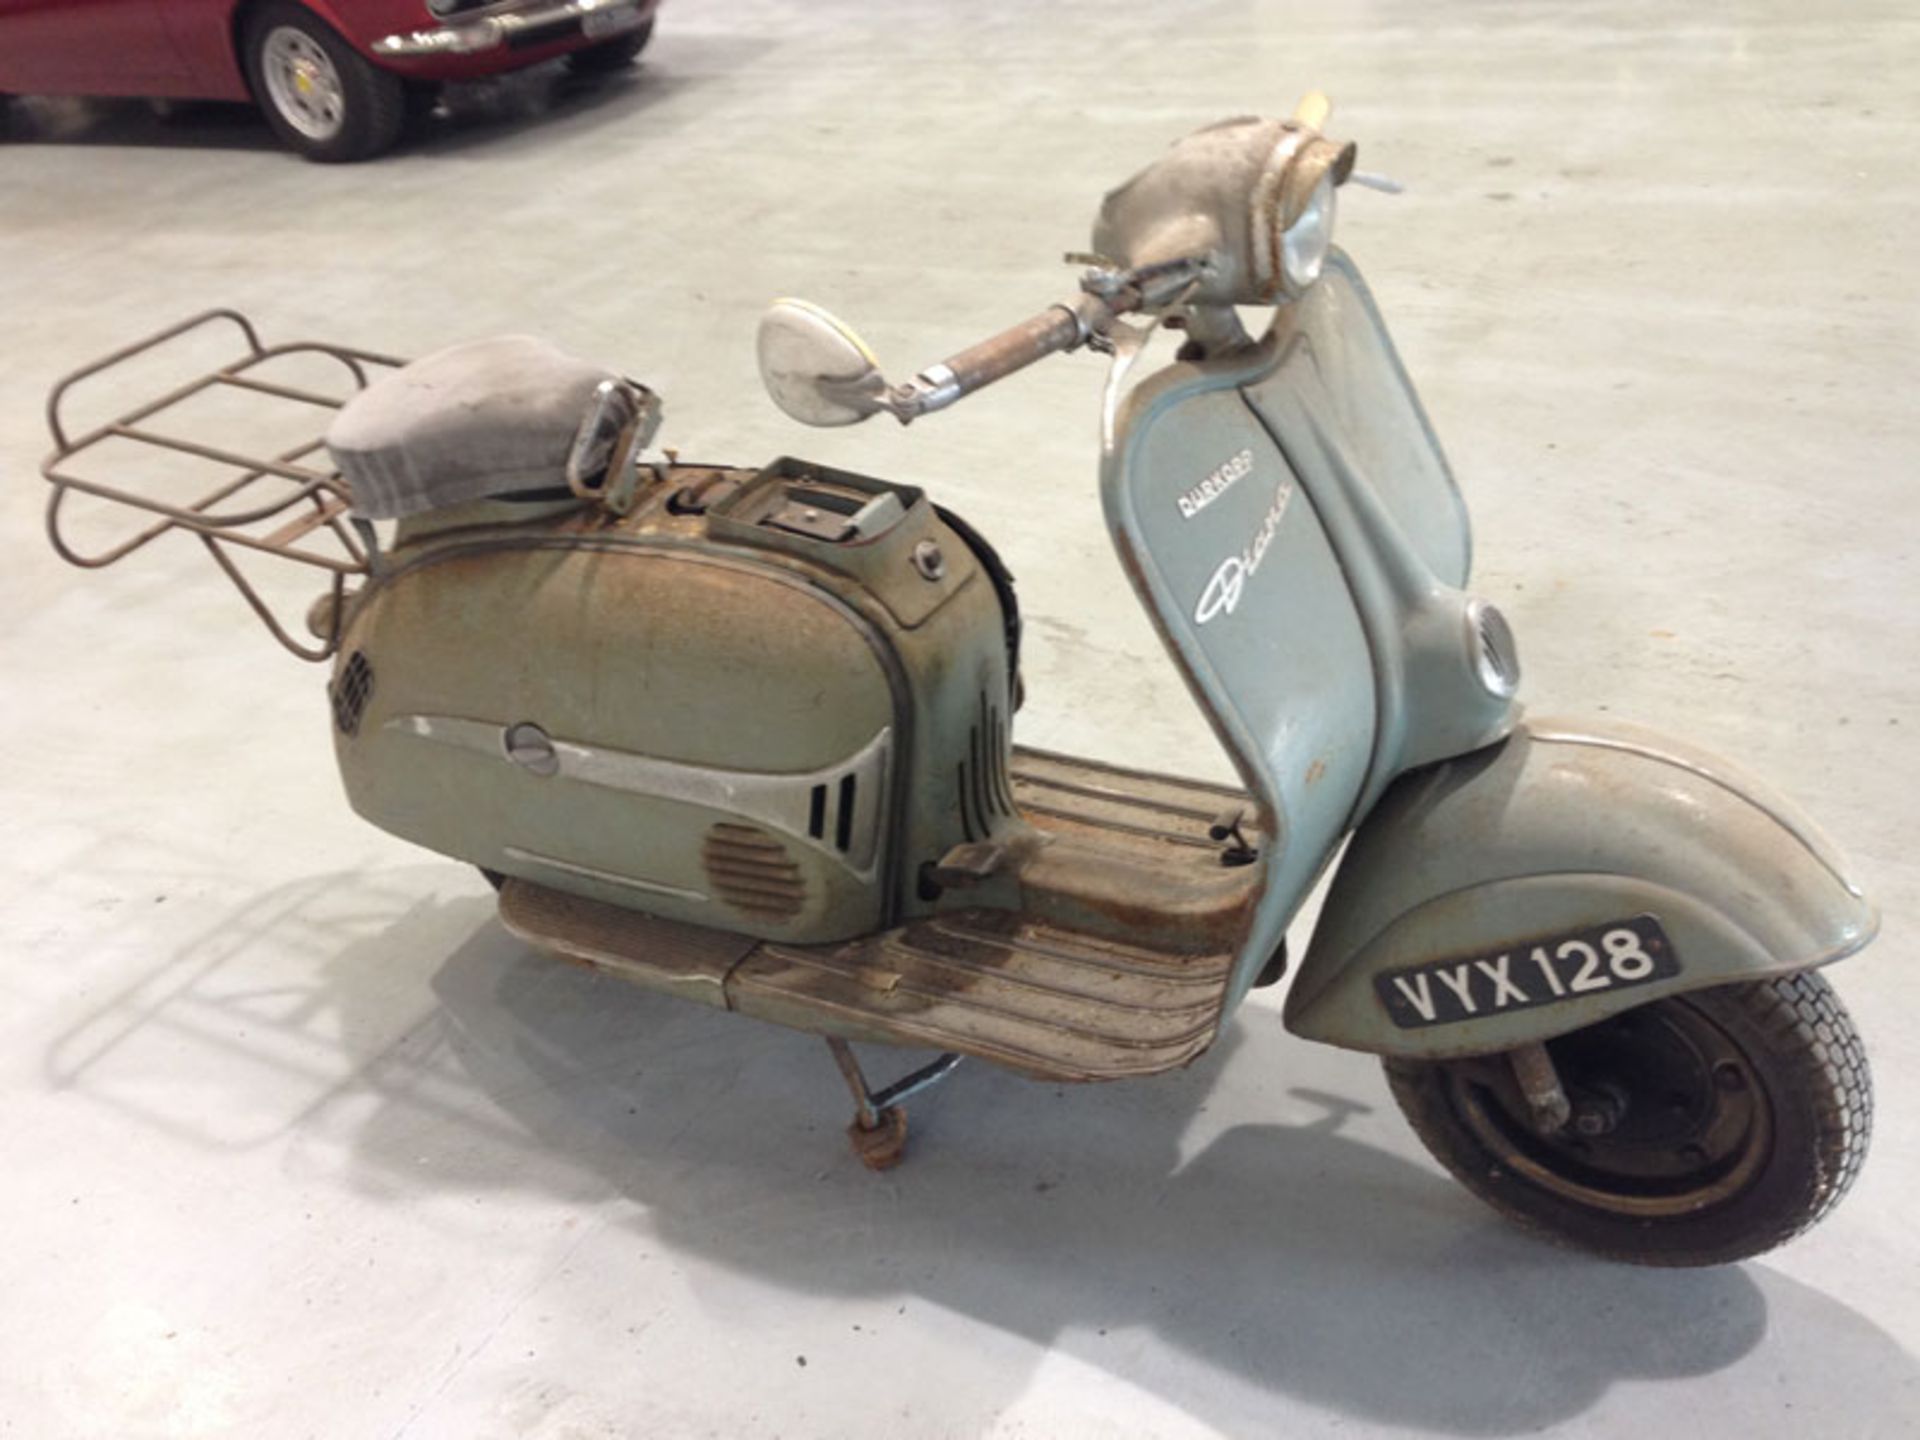 - Barn find condition

- 200cc engine

- Great restoration project

- Unrestored

- Iconic German